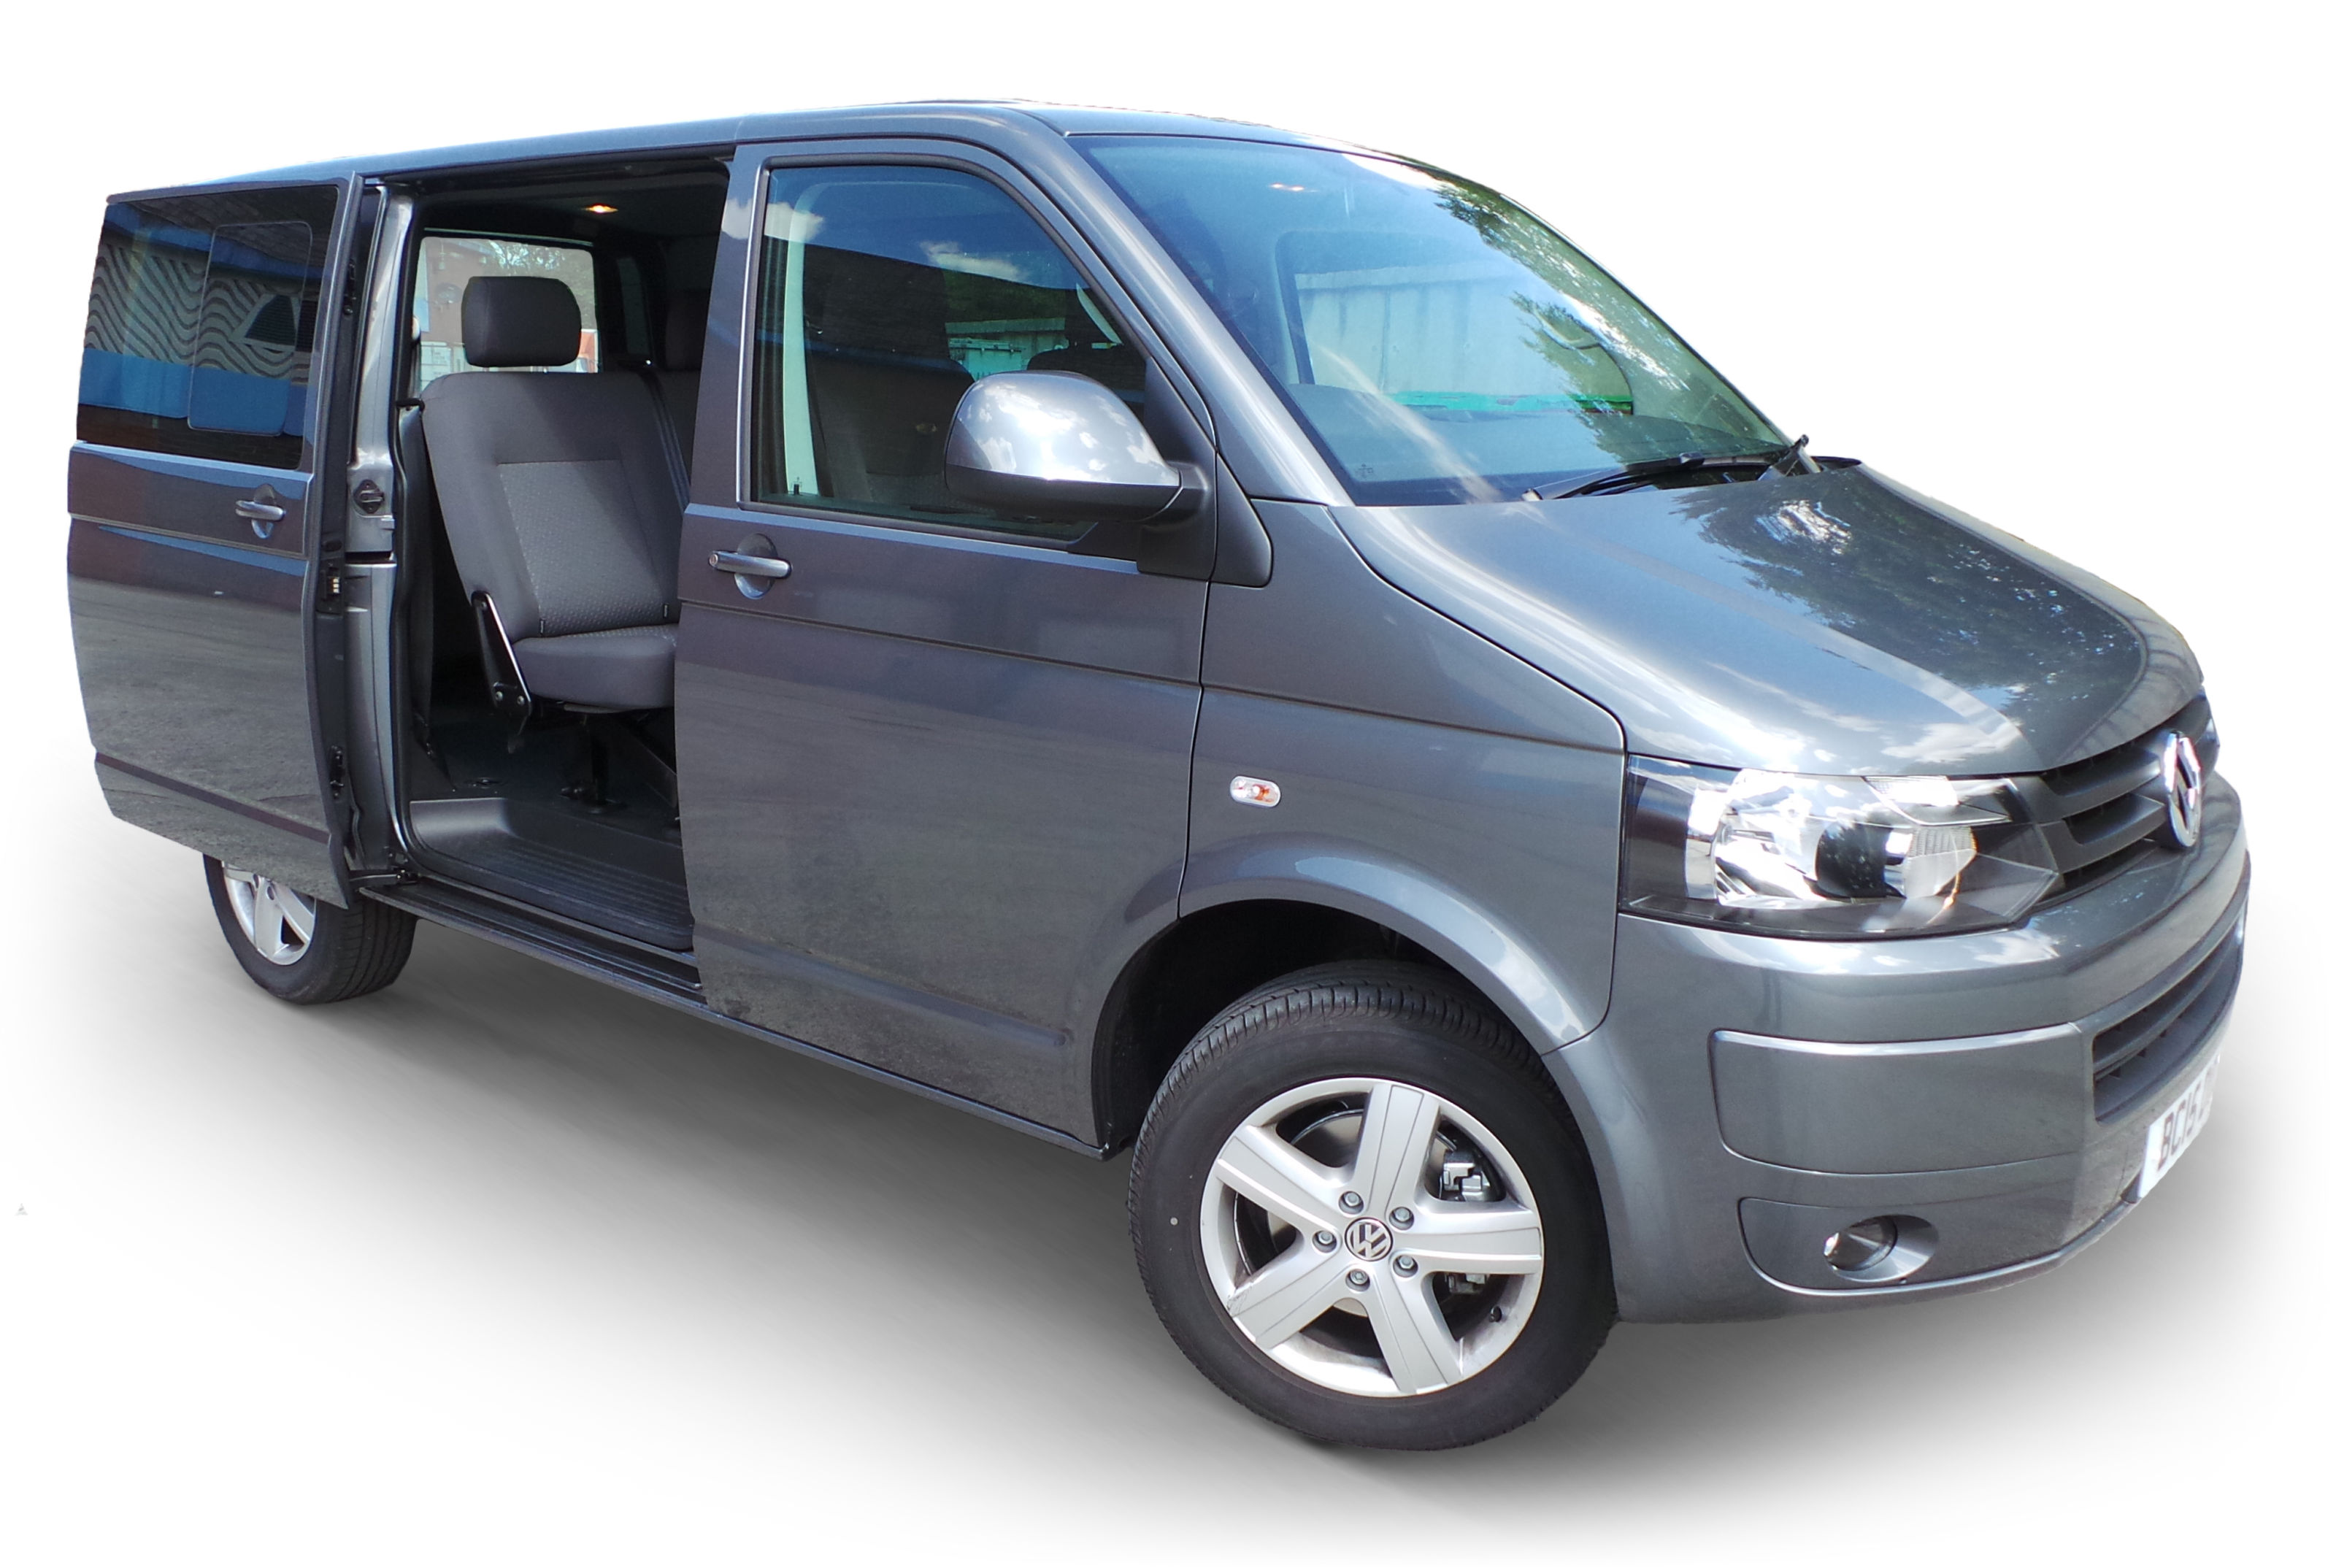 5 seater vans for hire